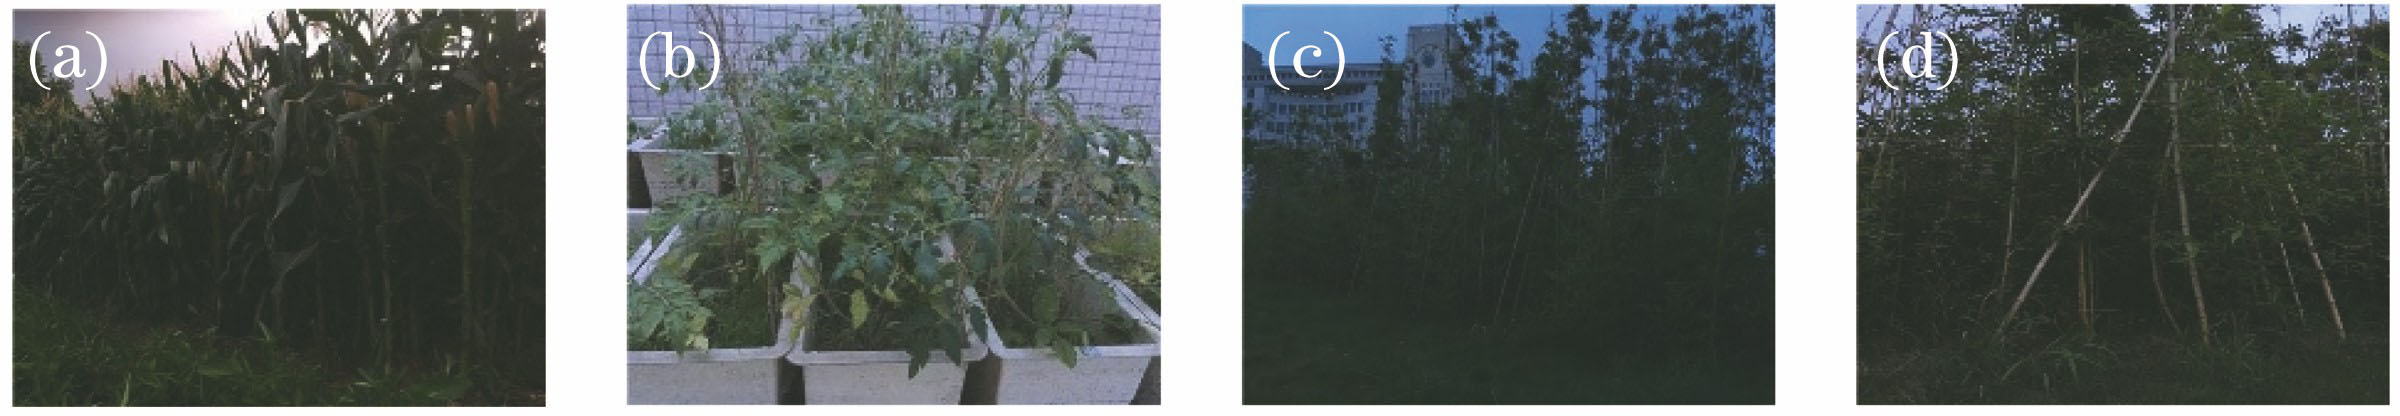 Experimental objects. (a) Corn; (b) tomato; (c) bamboo 1; (d) bamboo 2